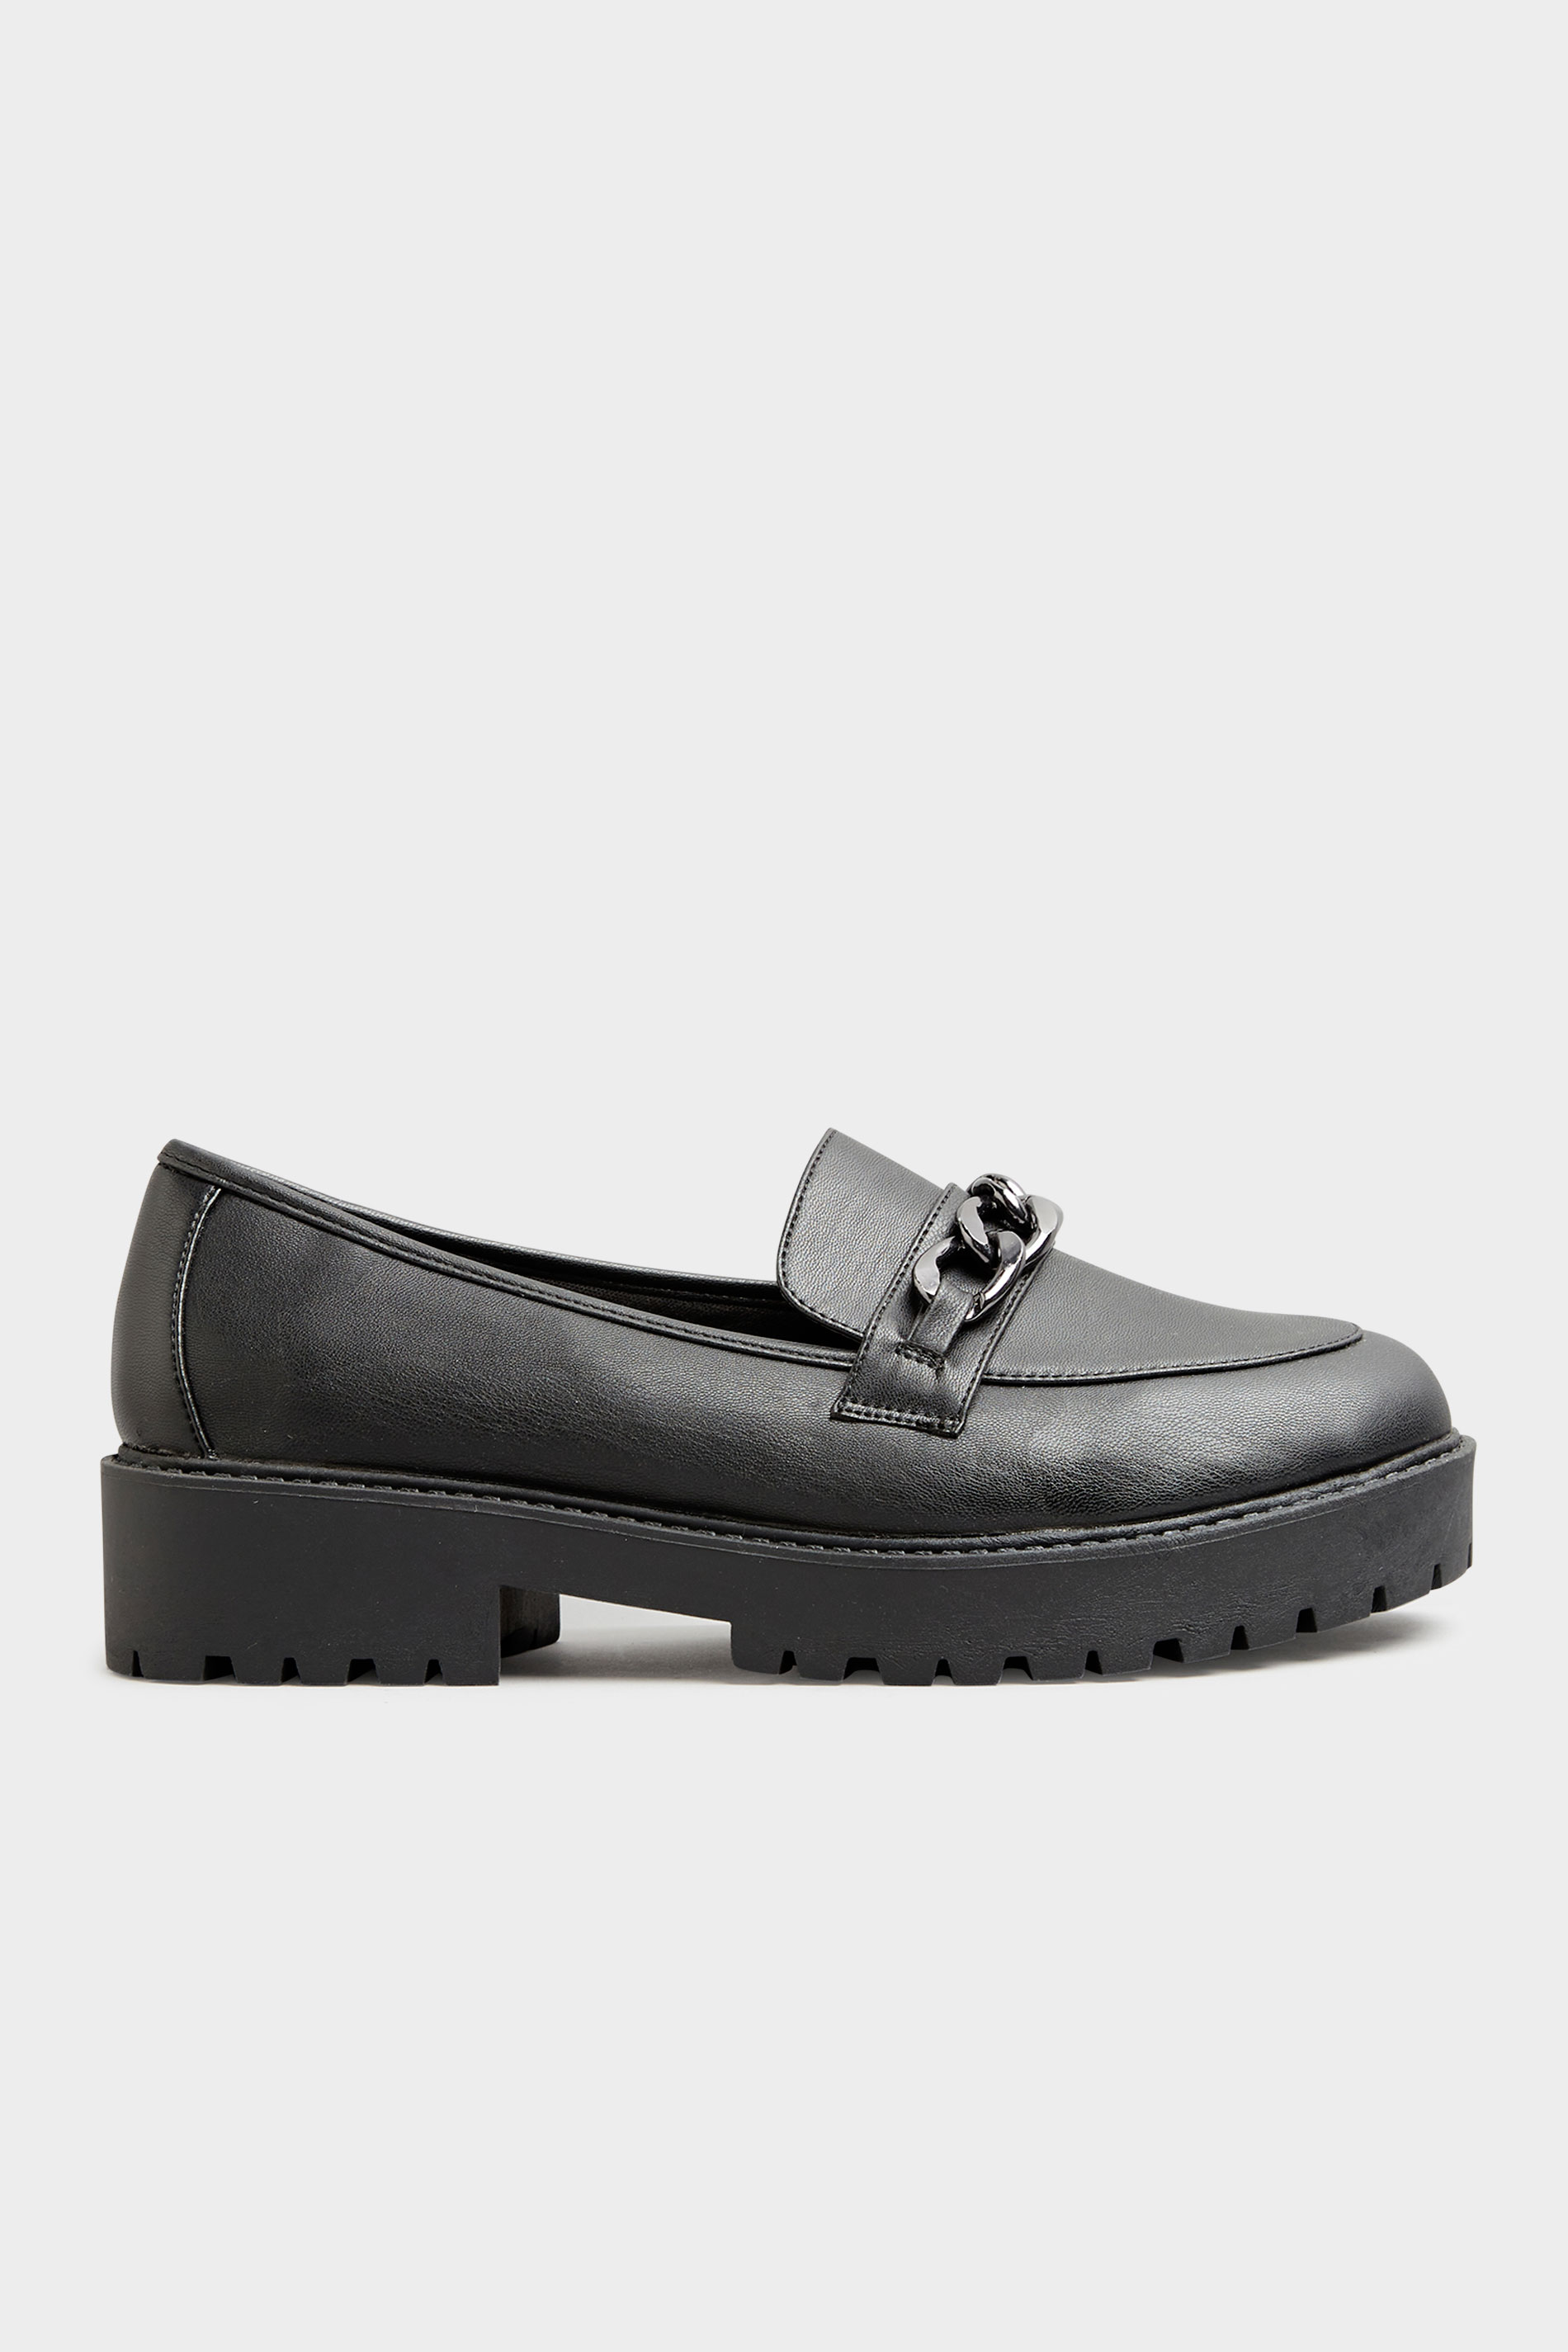 LIMITED COLLECTION Black Chunky Loafers In Extra Wide Fit | Long Tall Sally